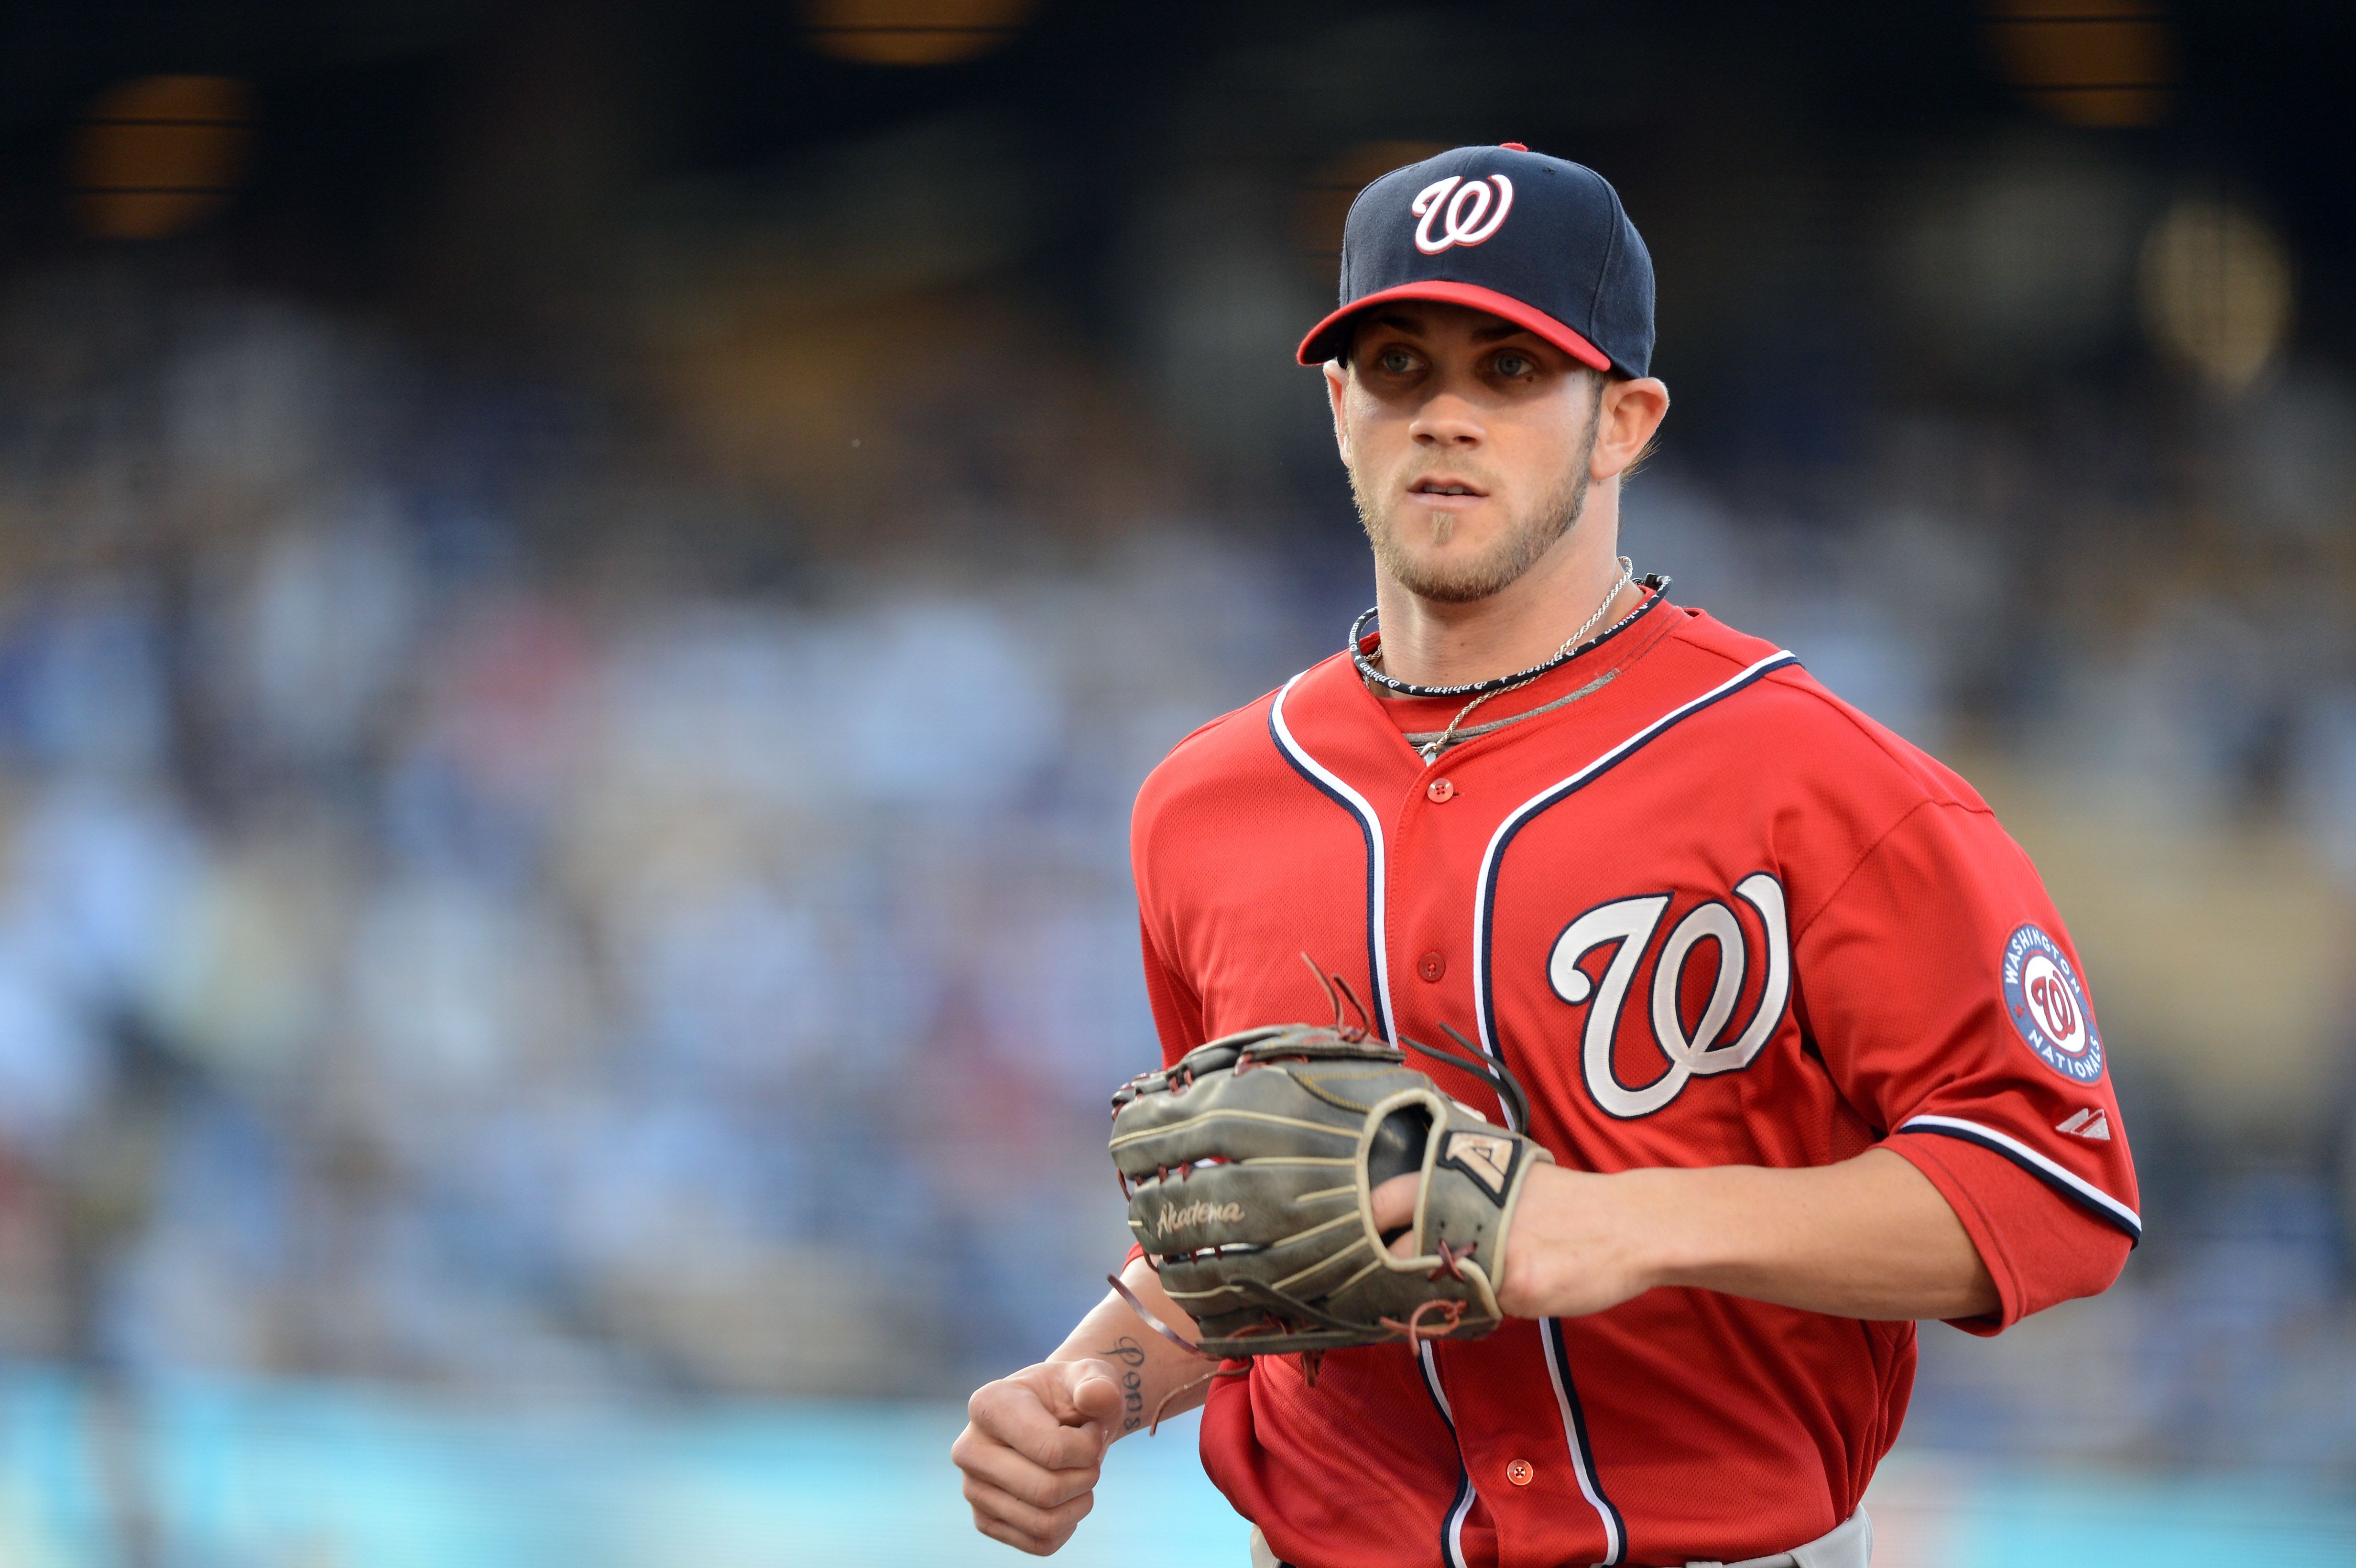 Harper and Nationals bring baseball hope to D.C.